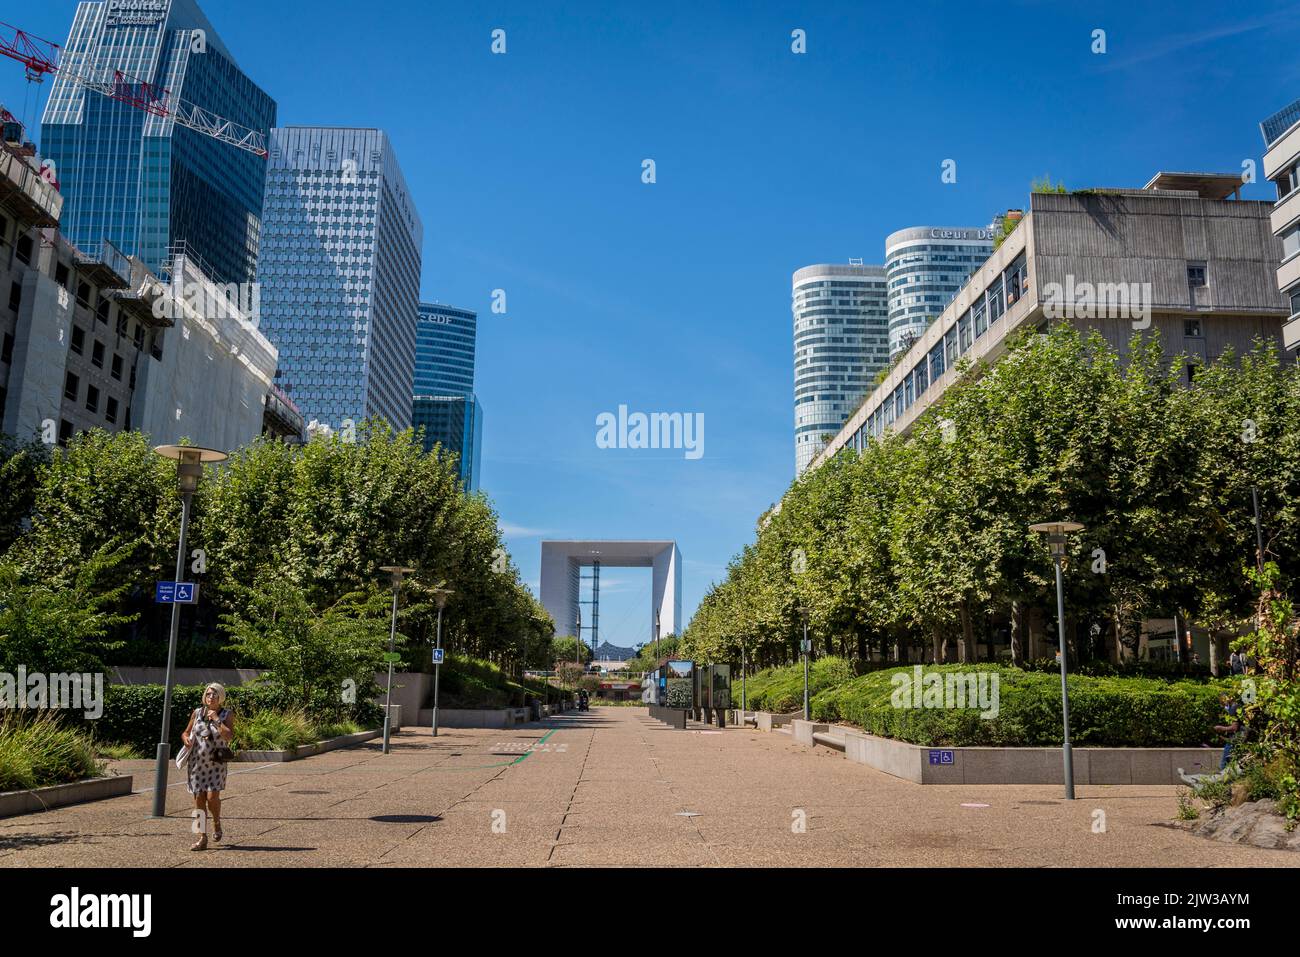 The Grand Arch, La Defense, a major business district located 3 kilometres west of the city limits of Paris, France Stock Photo